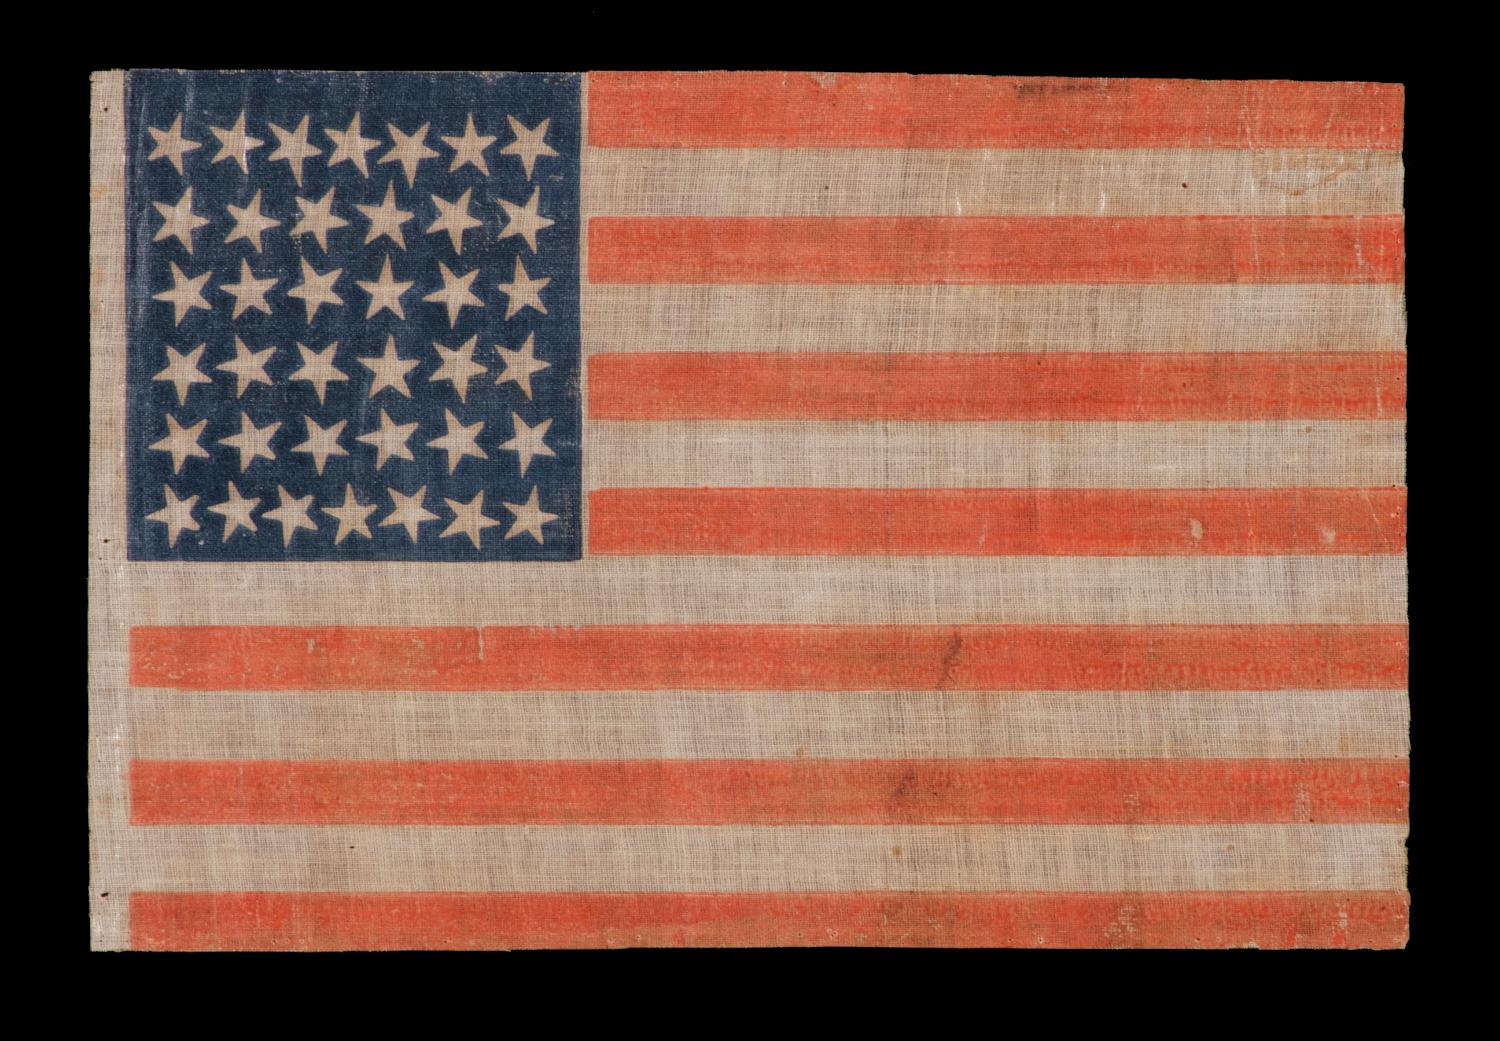 38 star antique American flag with scattered star positioning made during the period when Colorado was the most recent state to join the union, 1876-1889

38 star American national parade flag, printed on coarse cotton. The stars are arranged in